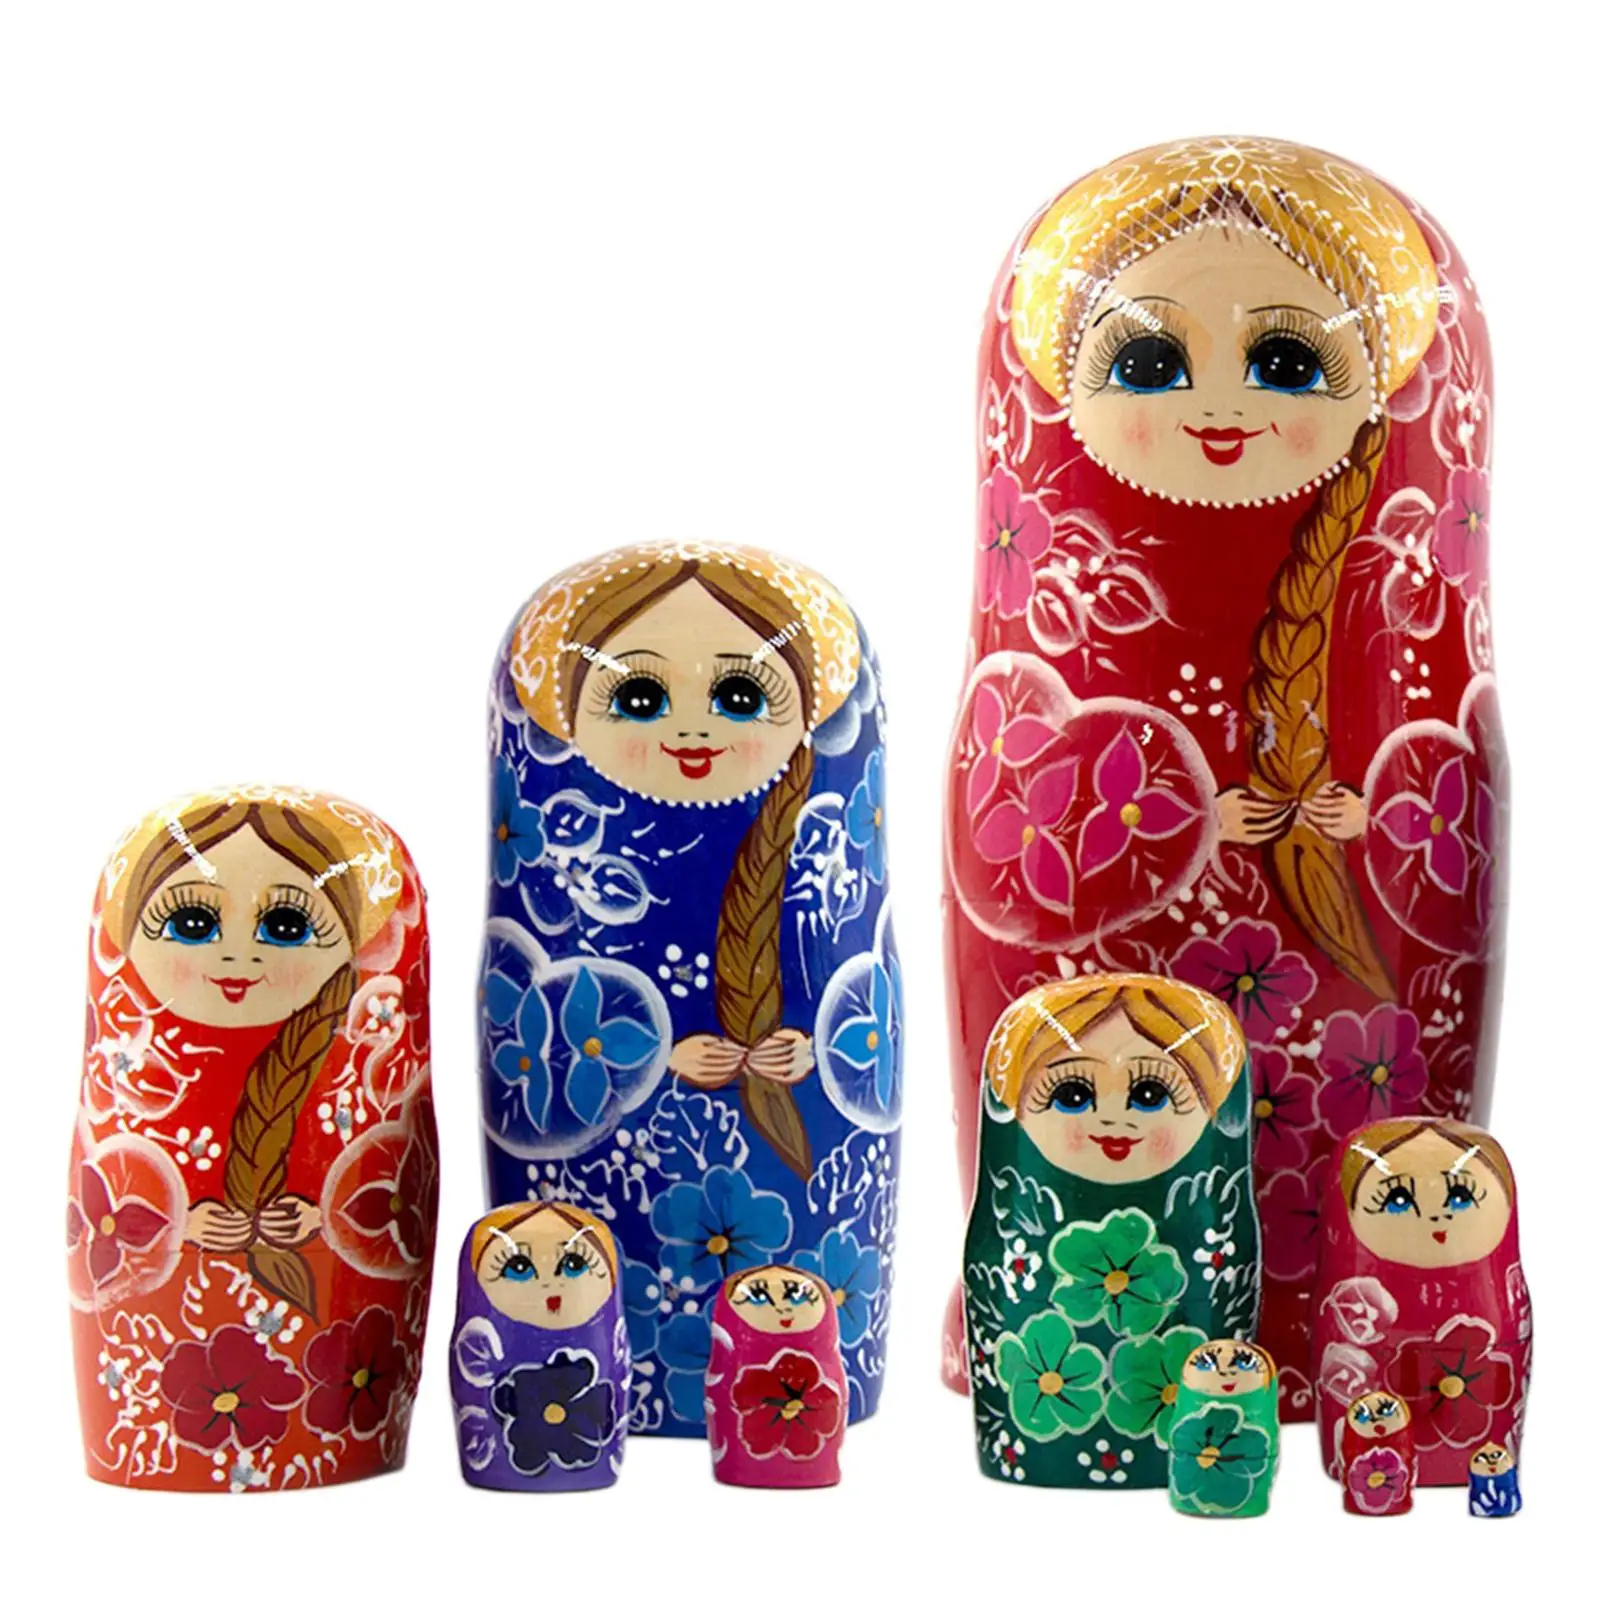 10x Chic Russian Nesting Dolls Matryoshka Doll Decoration Handmade Multipurpose Collectibles Wooden for Themed Party Bar Bedroom